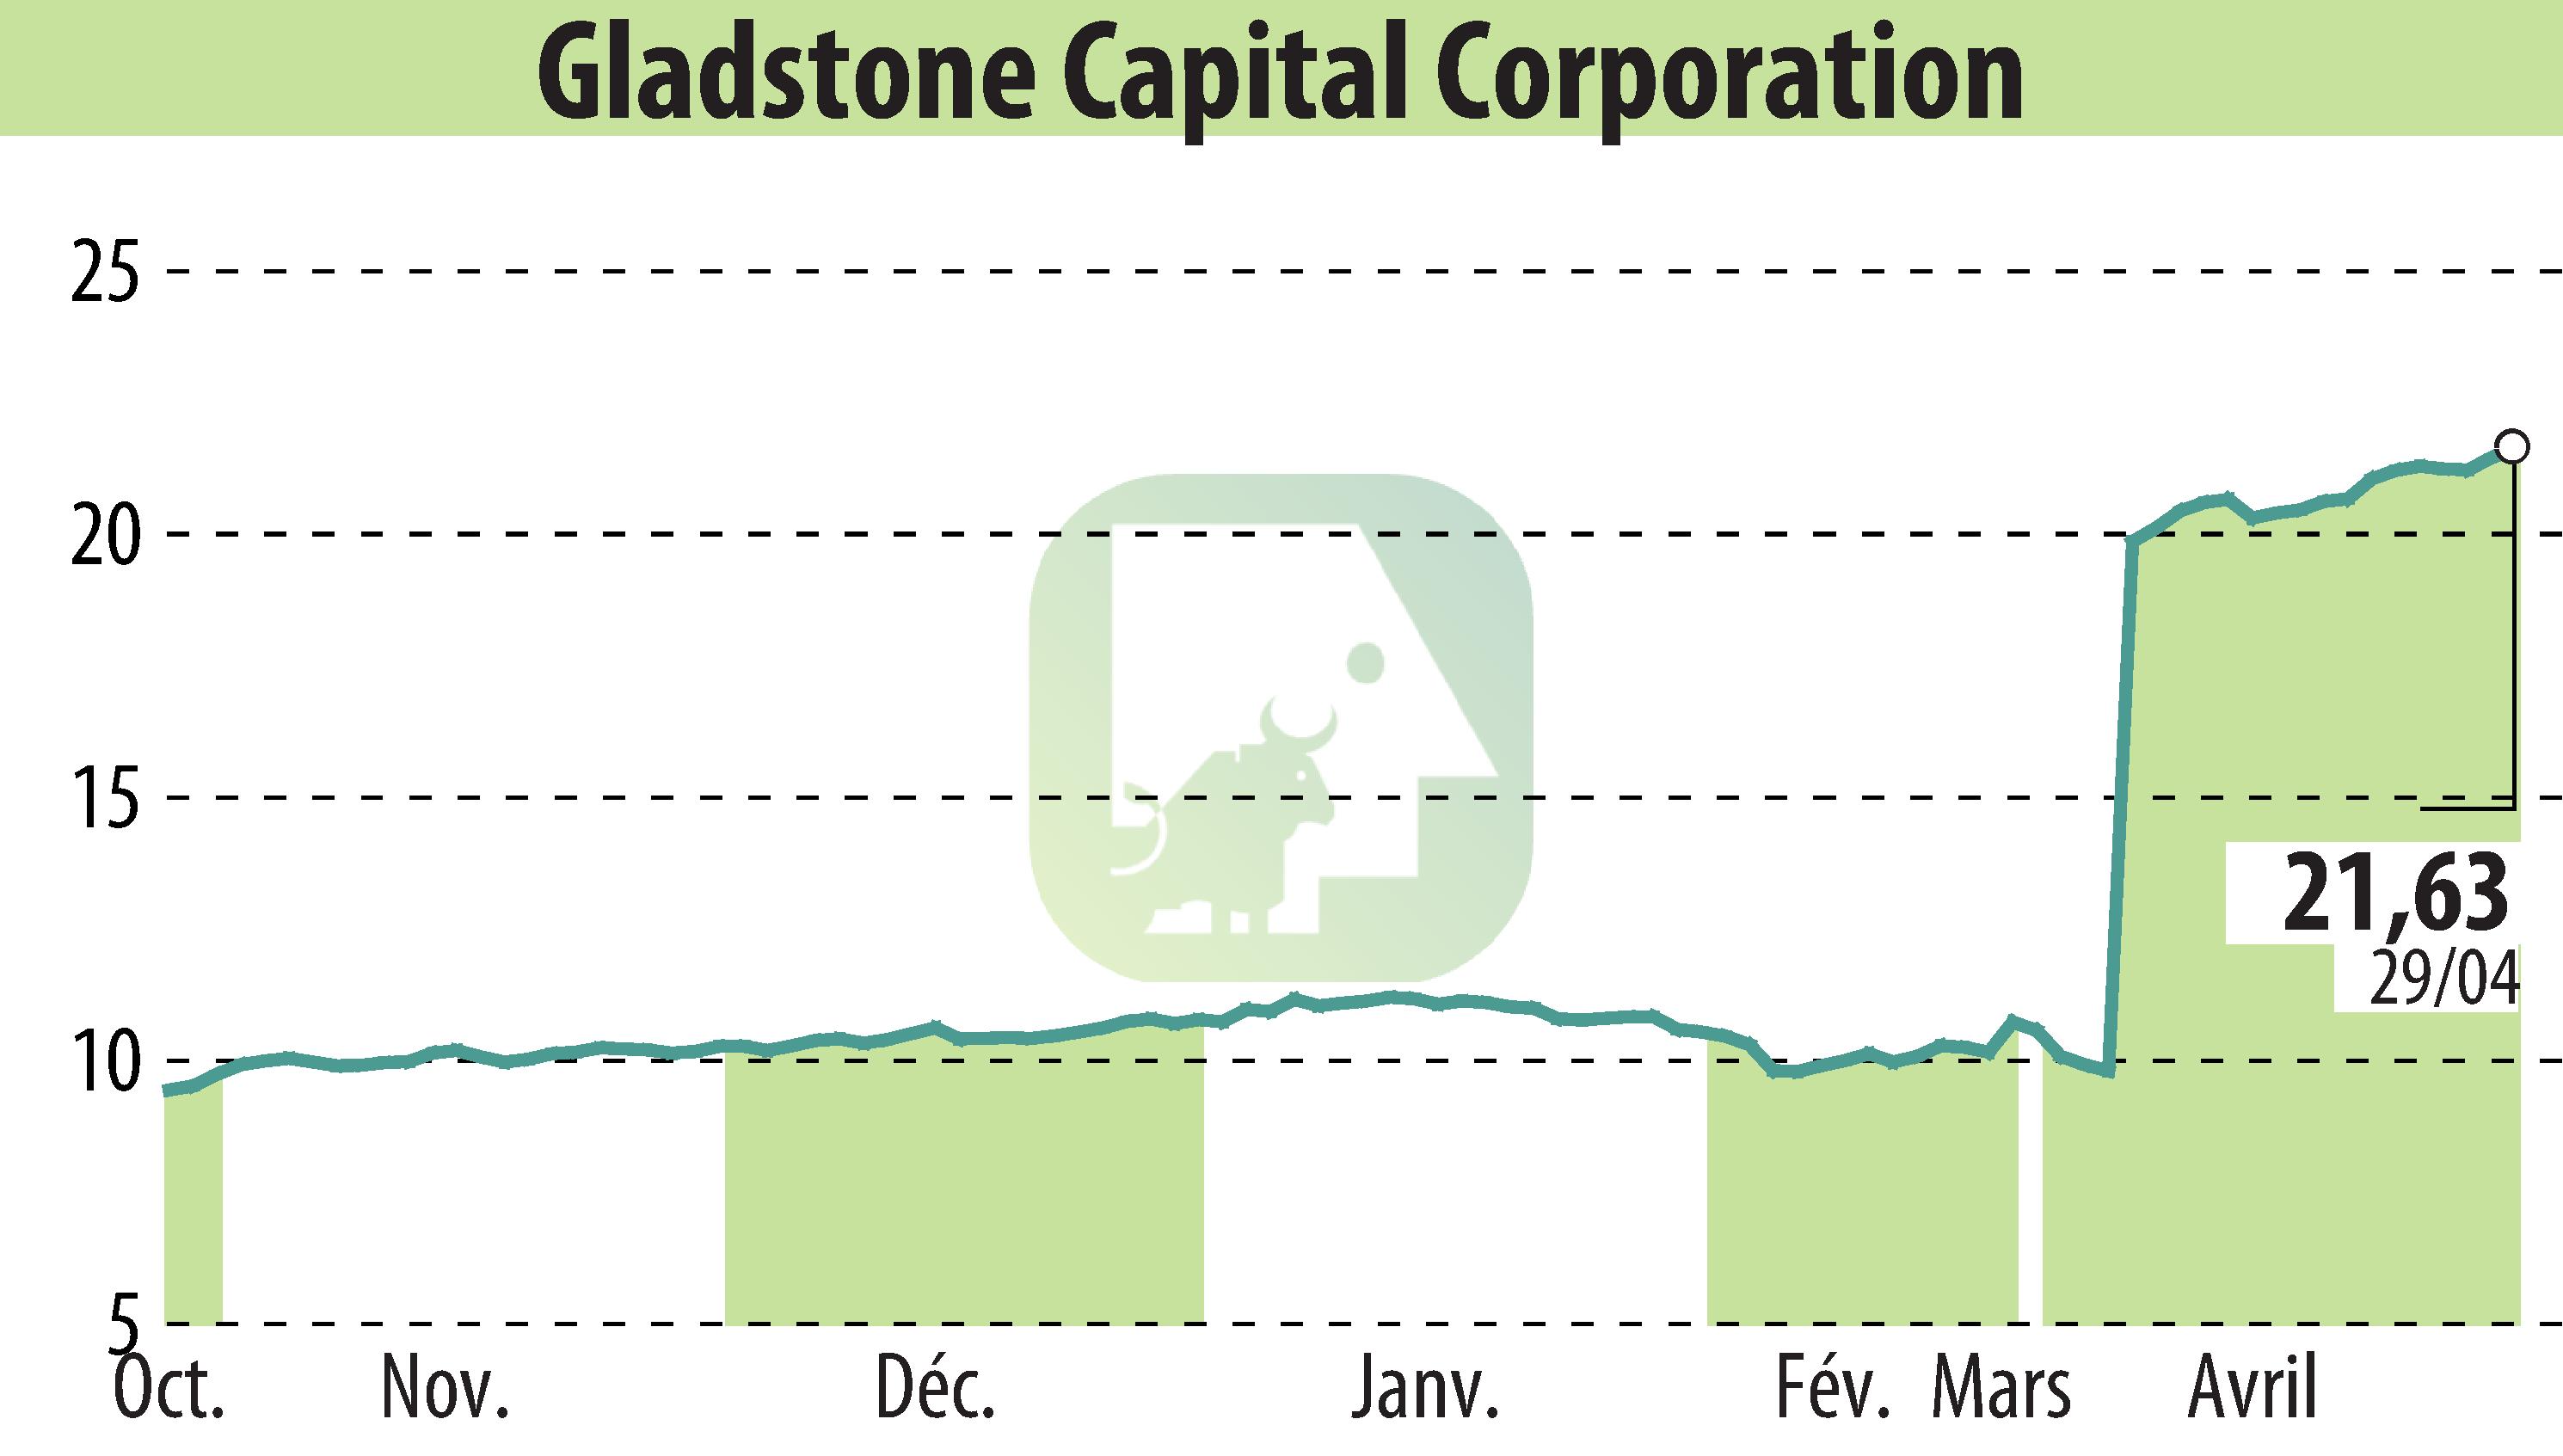 Stock price chart of Gladstone Capital Corporation (EBR:GLAD) showing fluctuations.